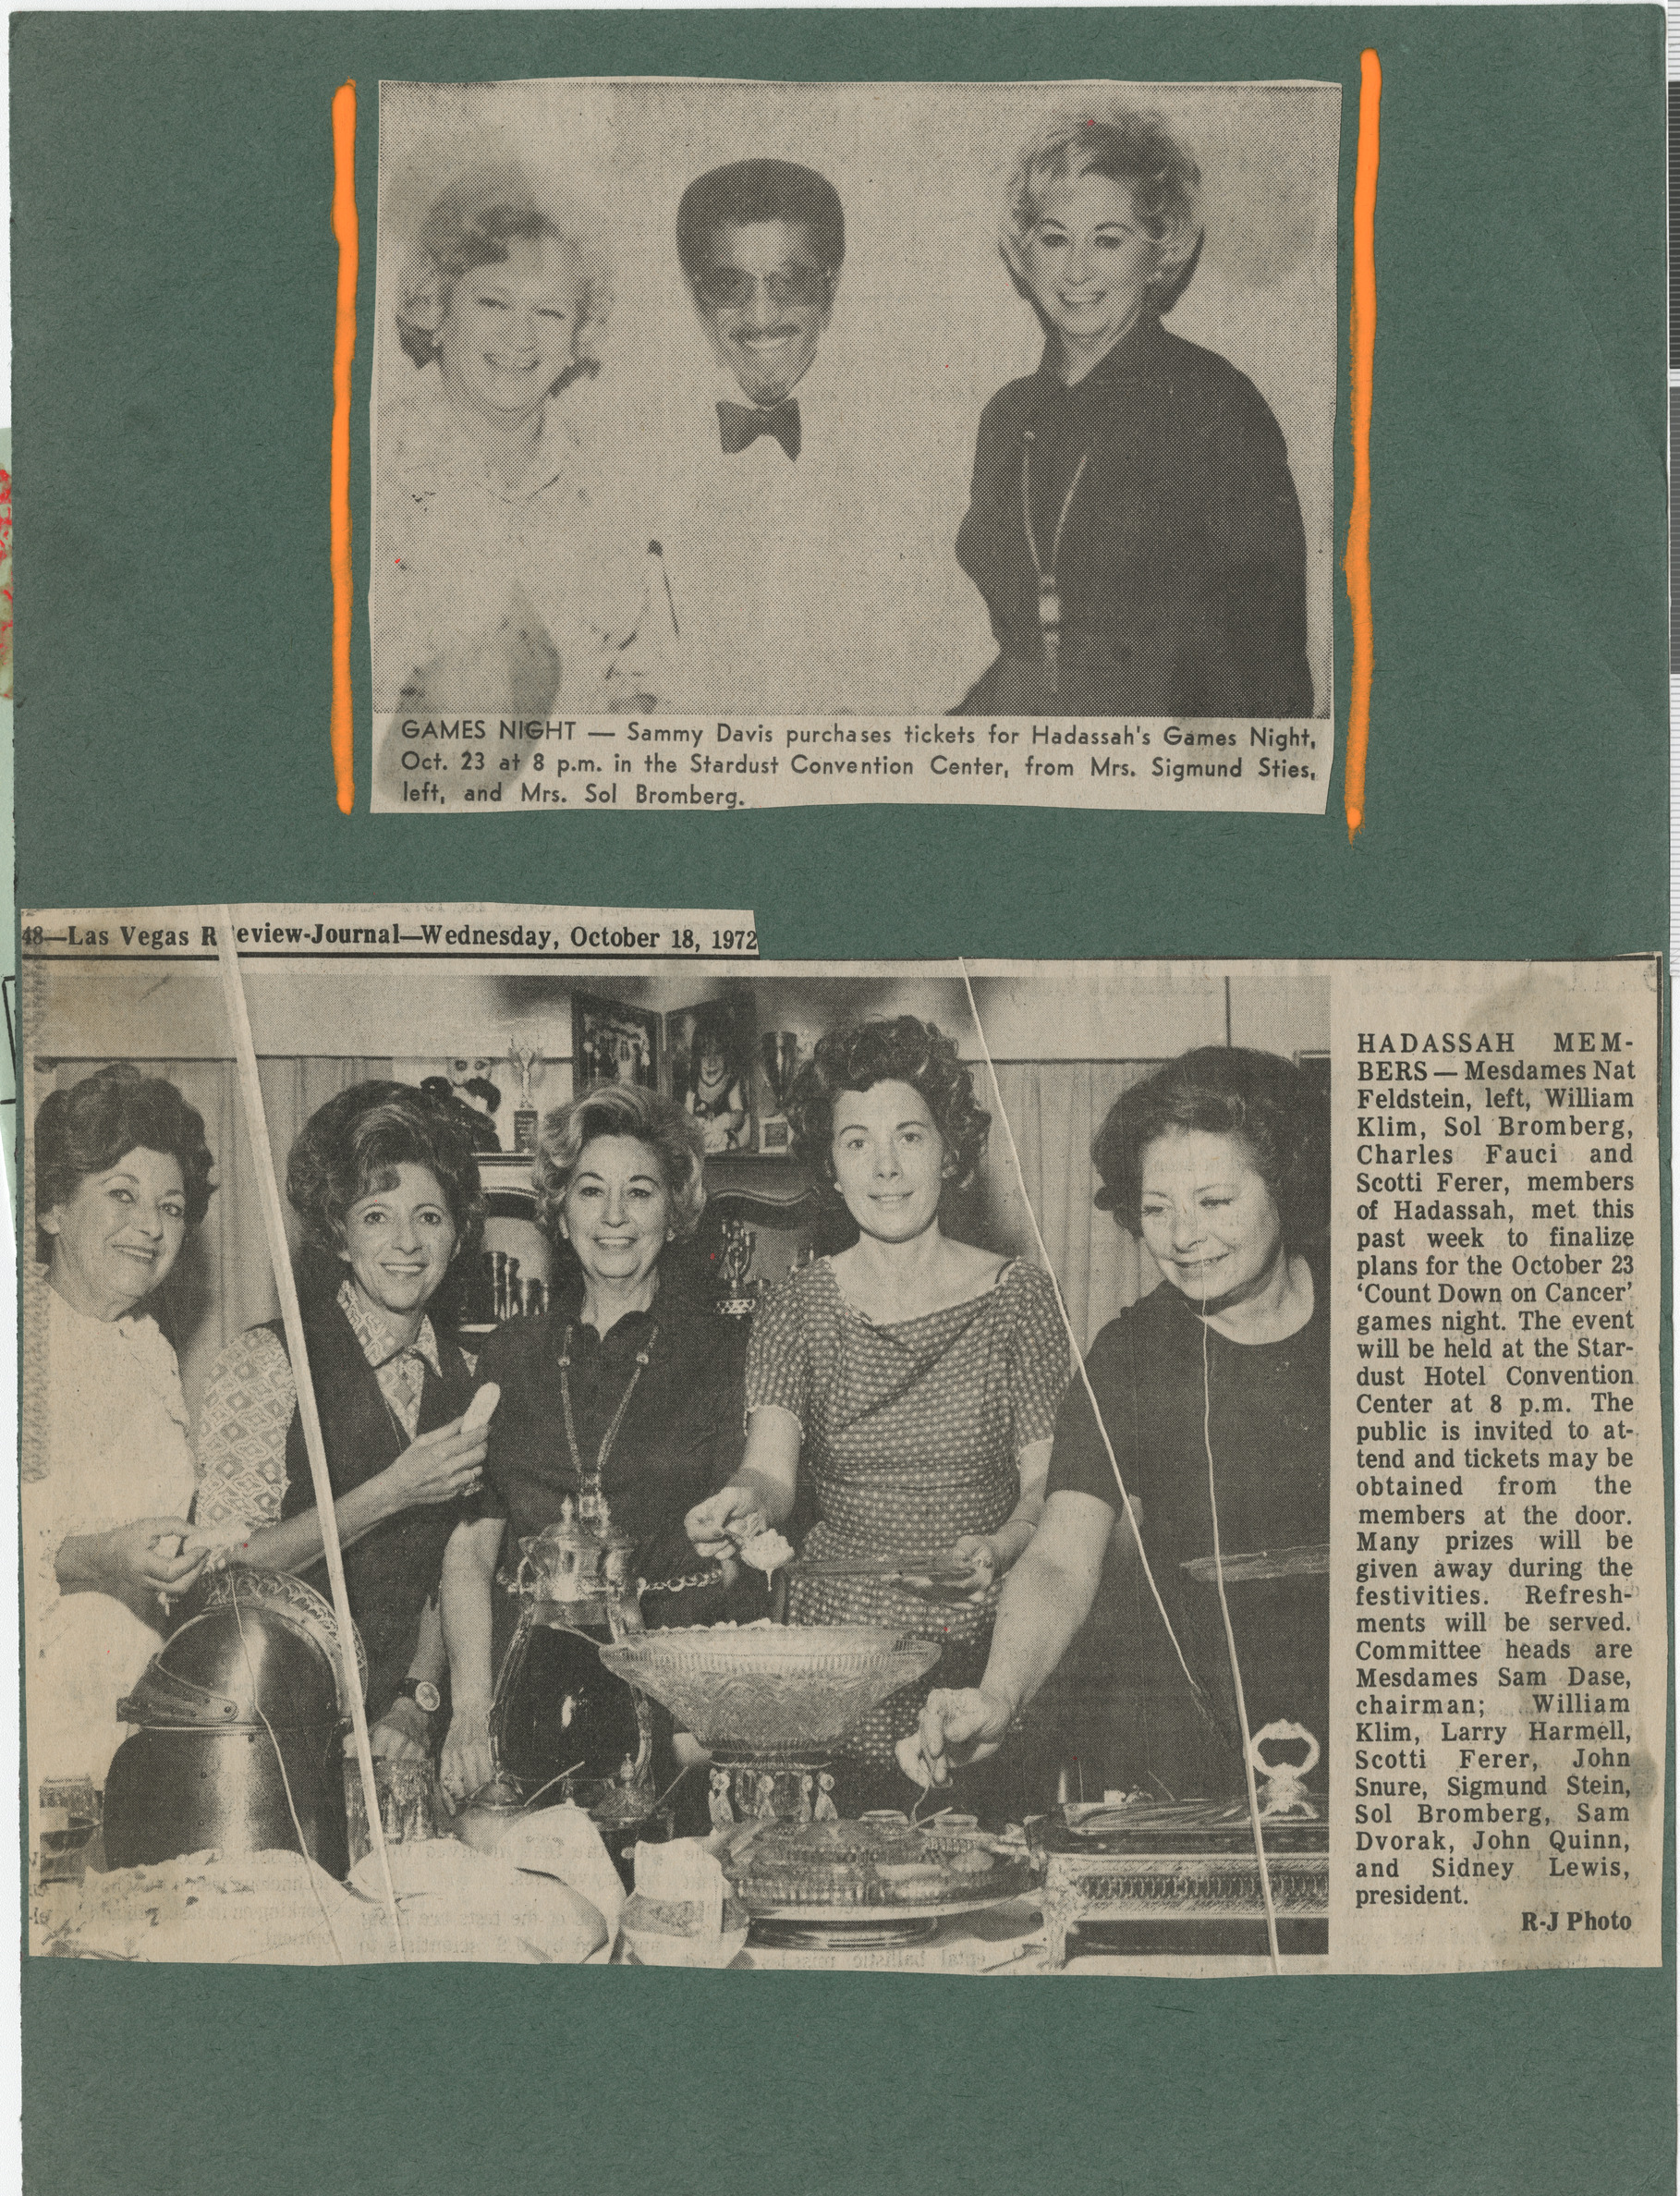 Newspaper clippings, Games night, photograph with Mrs. Sigmund Sties, Sammy Davis Jr., and Mrs. Sol Bromberg, and Hadassah members, Las Vegas Review-Journal, October 18, 1972